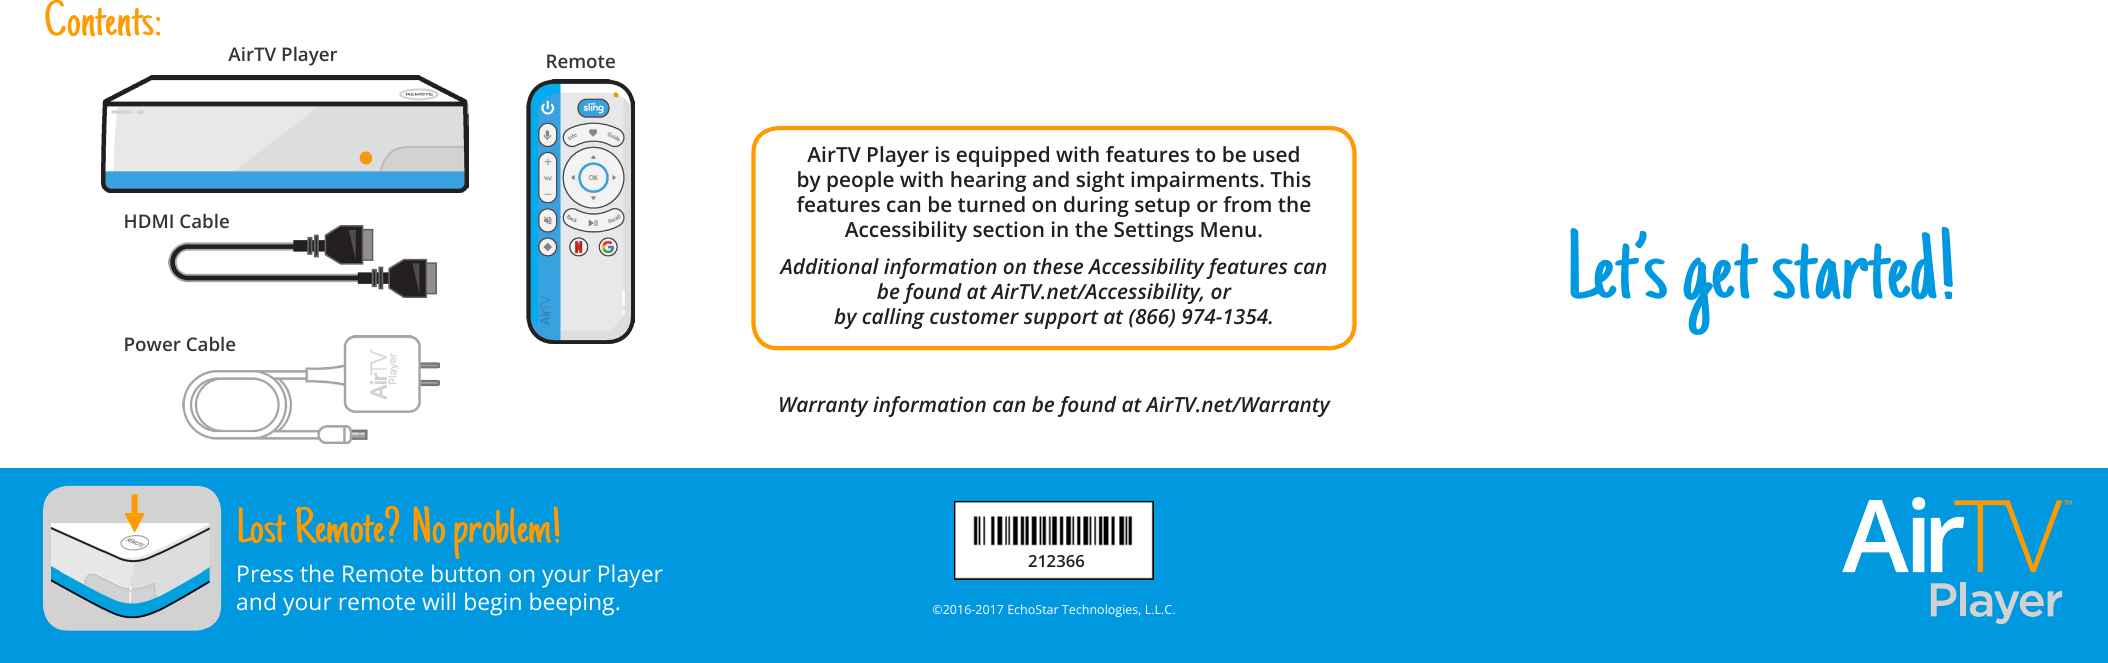 Let’s get started!AirTV Player is equipped with features to be used by people with hearing and sight impairments. This features can be turned on during setup or from the Accessibility section in the Settings Menu. Additional information on these Accessibility features can be found at AirTV.net/Accessibility, orby calling customer support at (866) 974-1354.Warranty information can be found at AirTV.net/Warranty©2016-2017 EchoStar Technologies, L.L.C.Lost Remote? No problem!Press the Remote button on your Player and your remote will begin beeping.Contents:AirTV Player RemotePower CableHDMI Cable212366